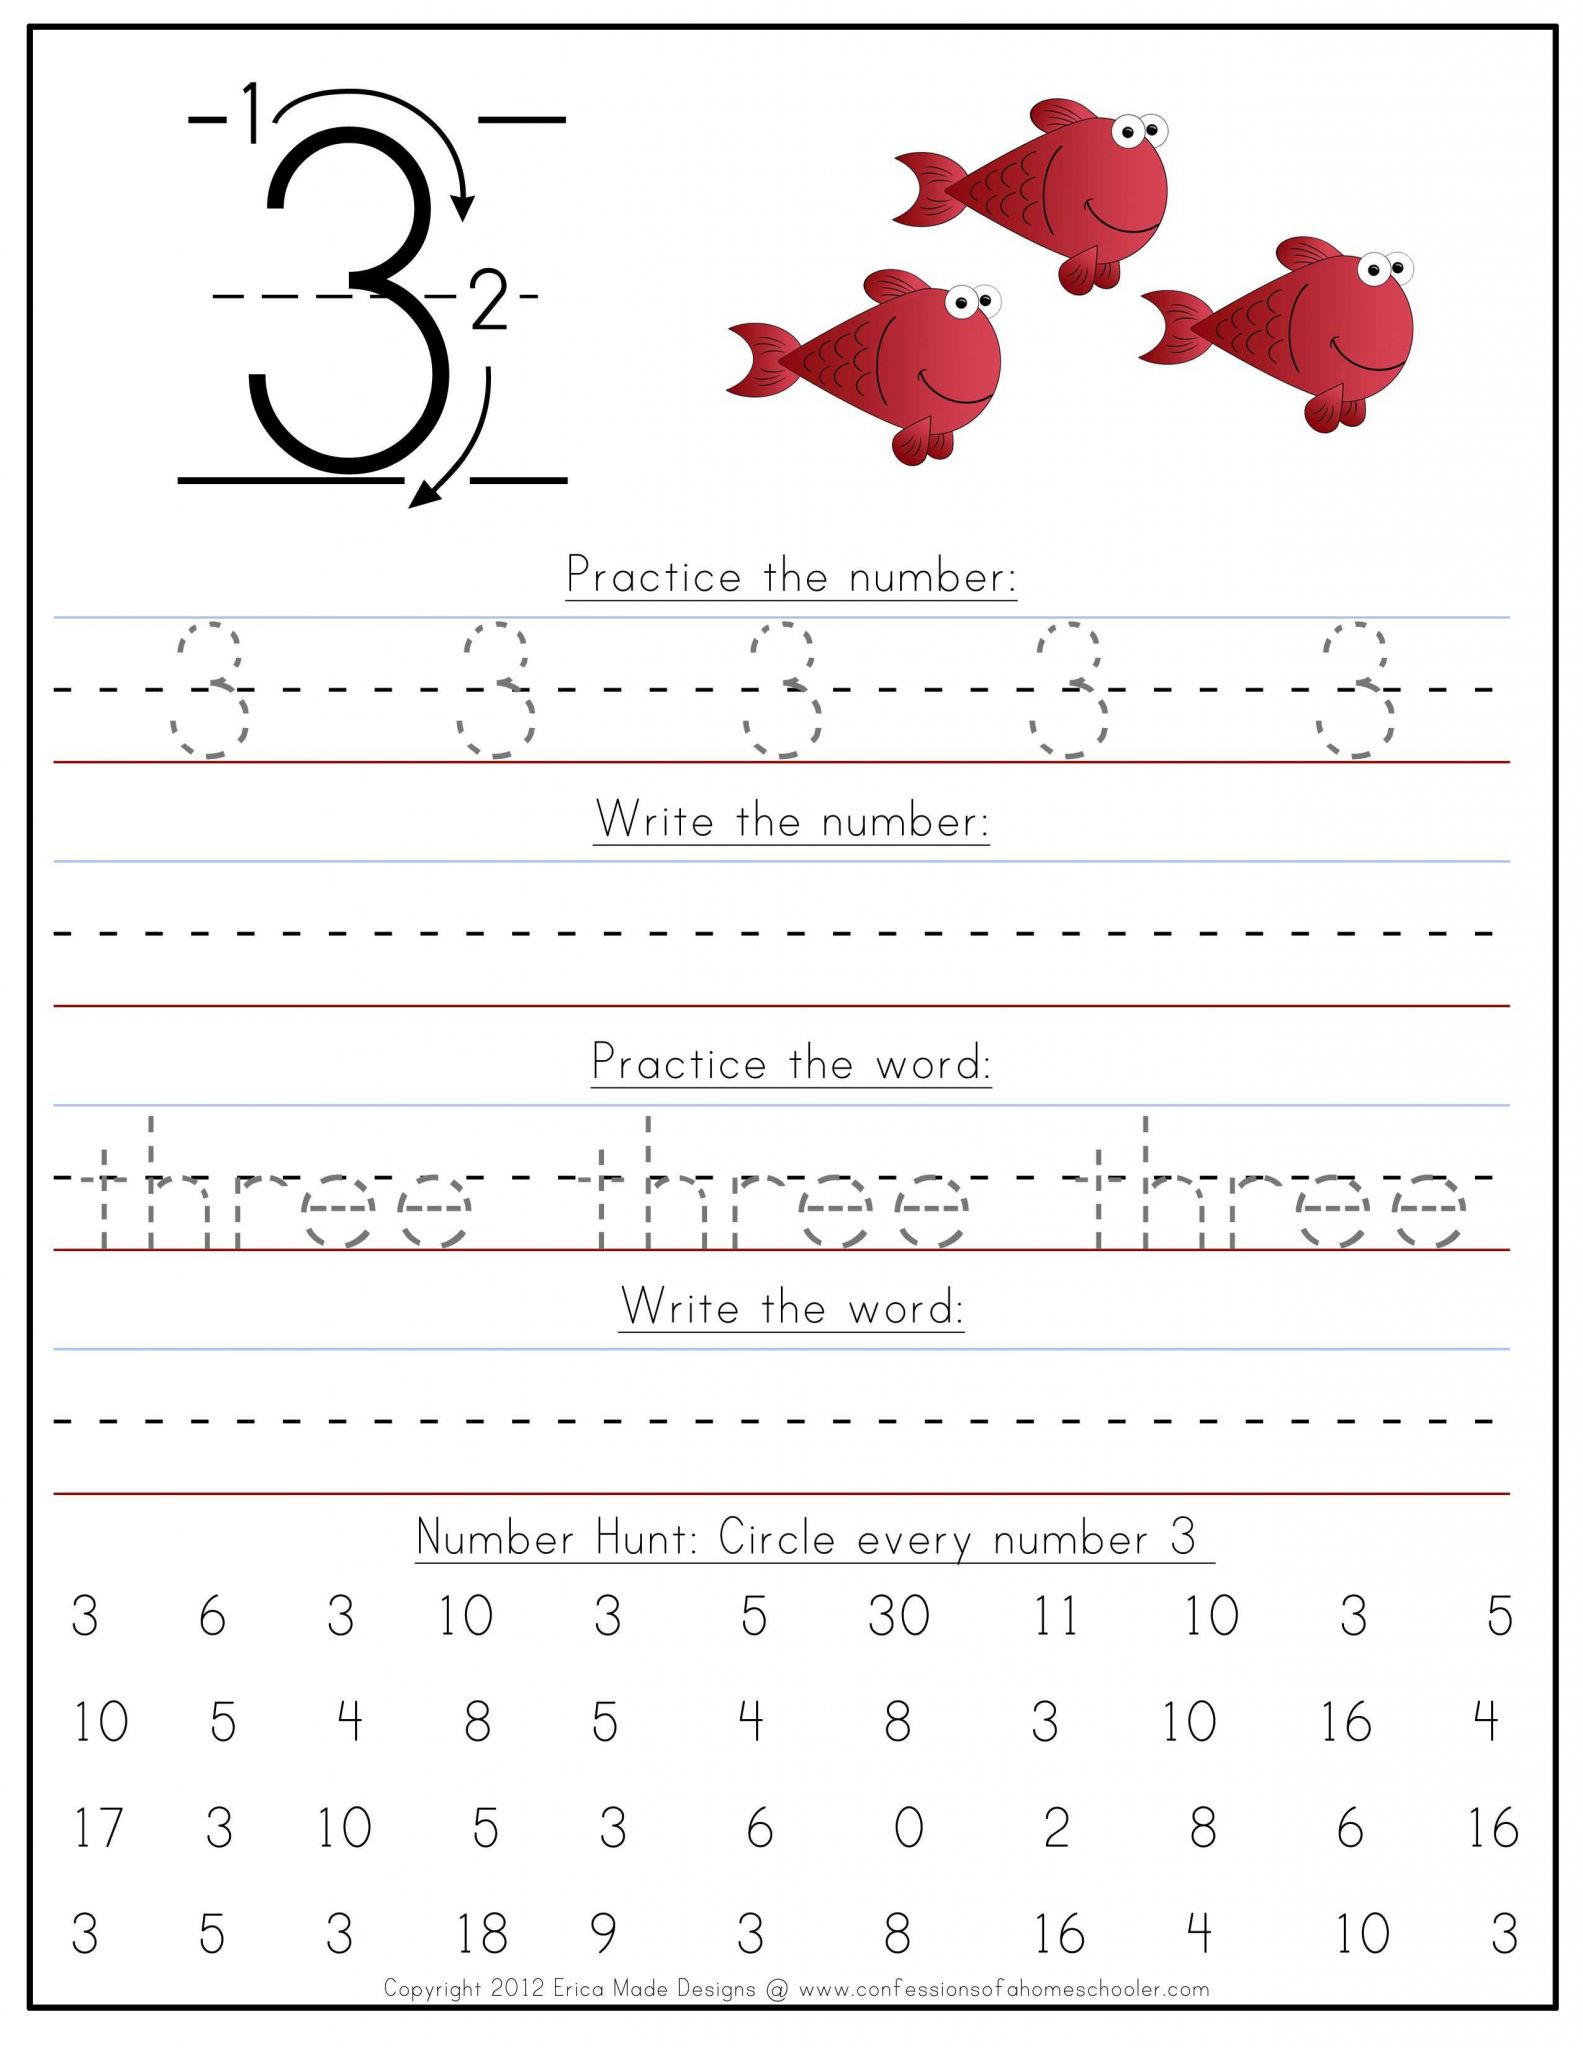 Counting Worksheets for Preschool as Well as Love these Here S A Terrific Set Of Number Writing Pages for the